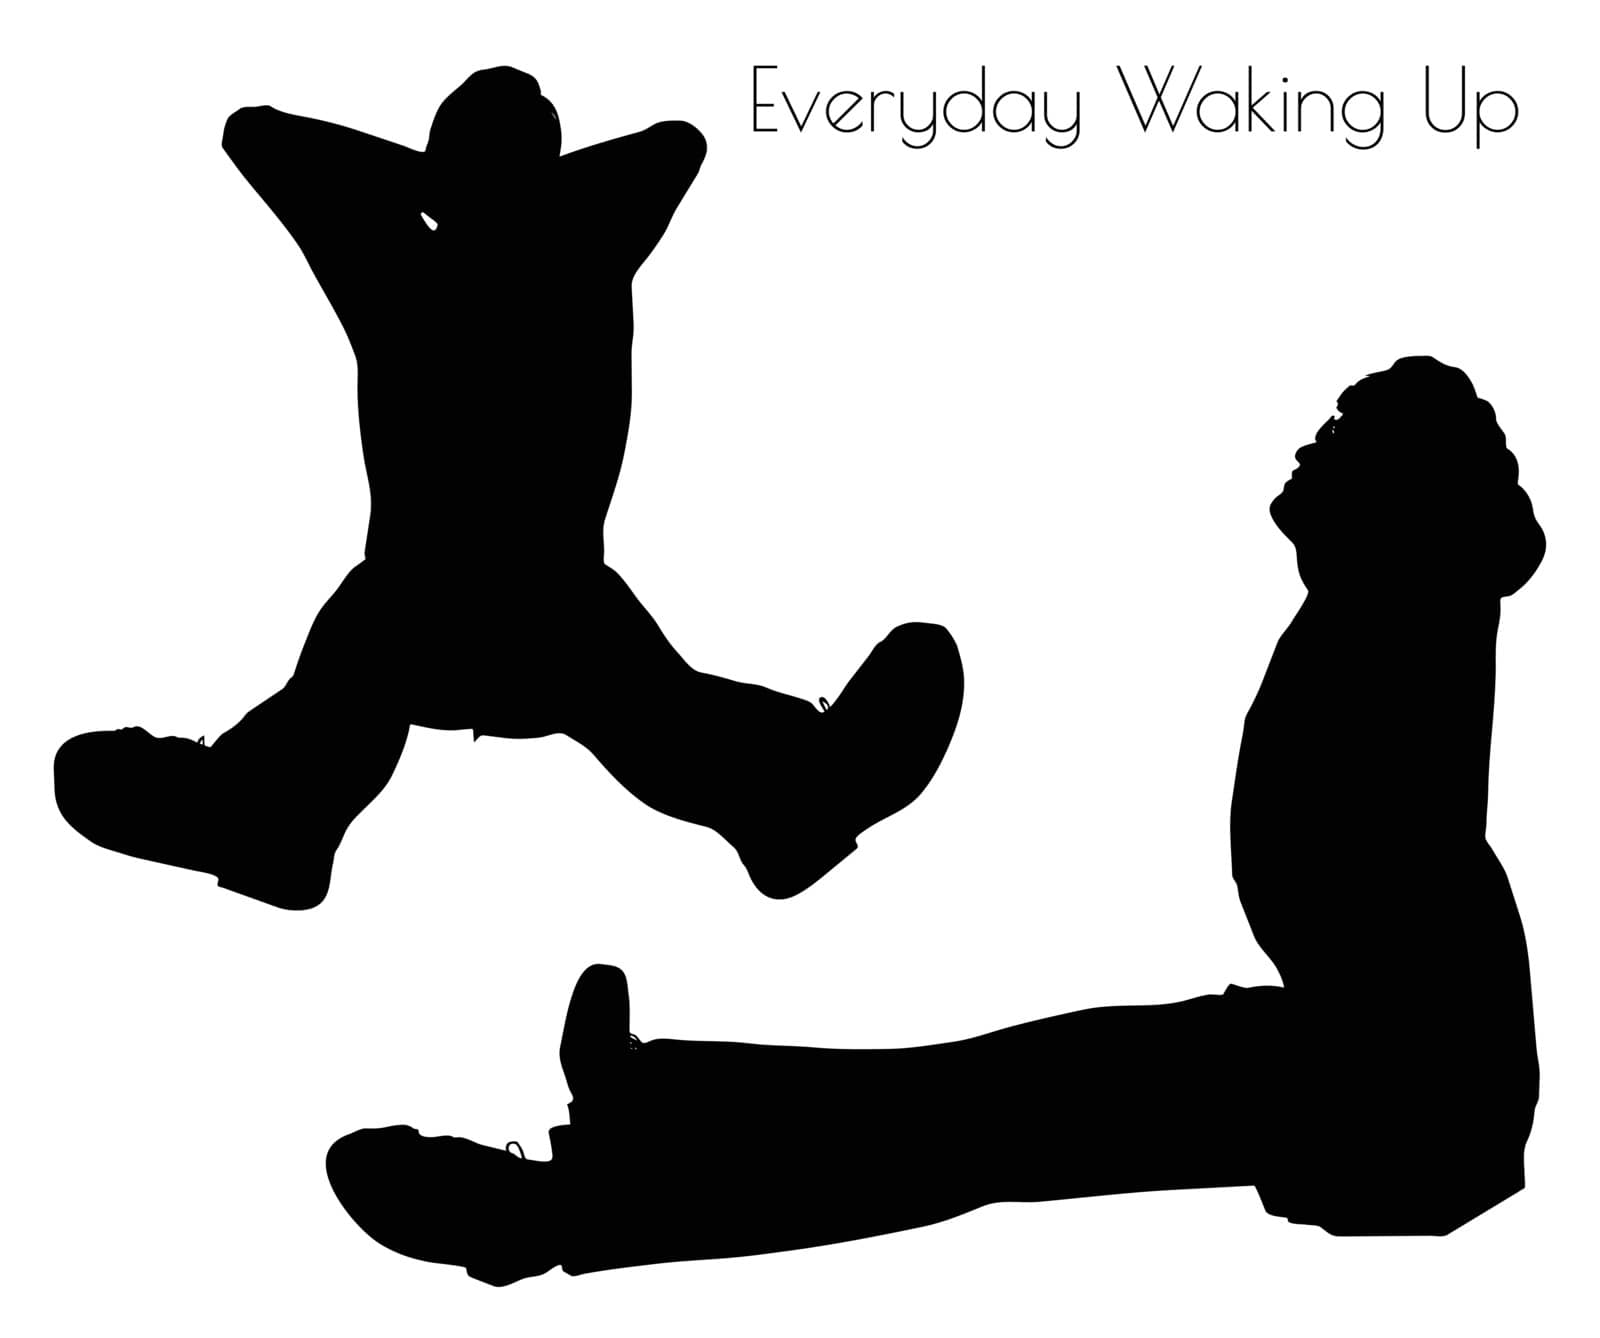 EPS 10 vector illustration of man in Everyday Waking Up pose on white background
